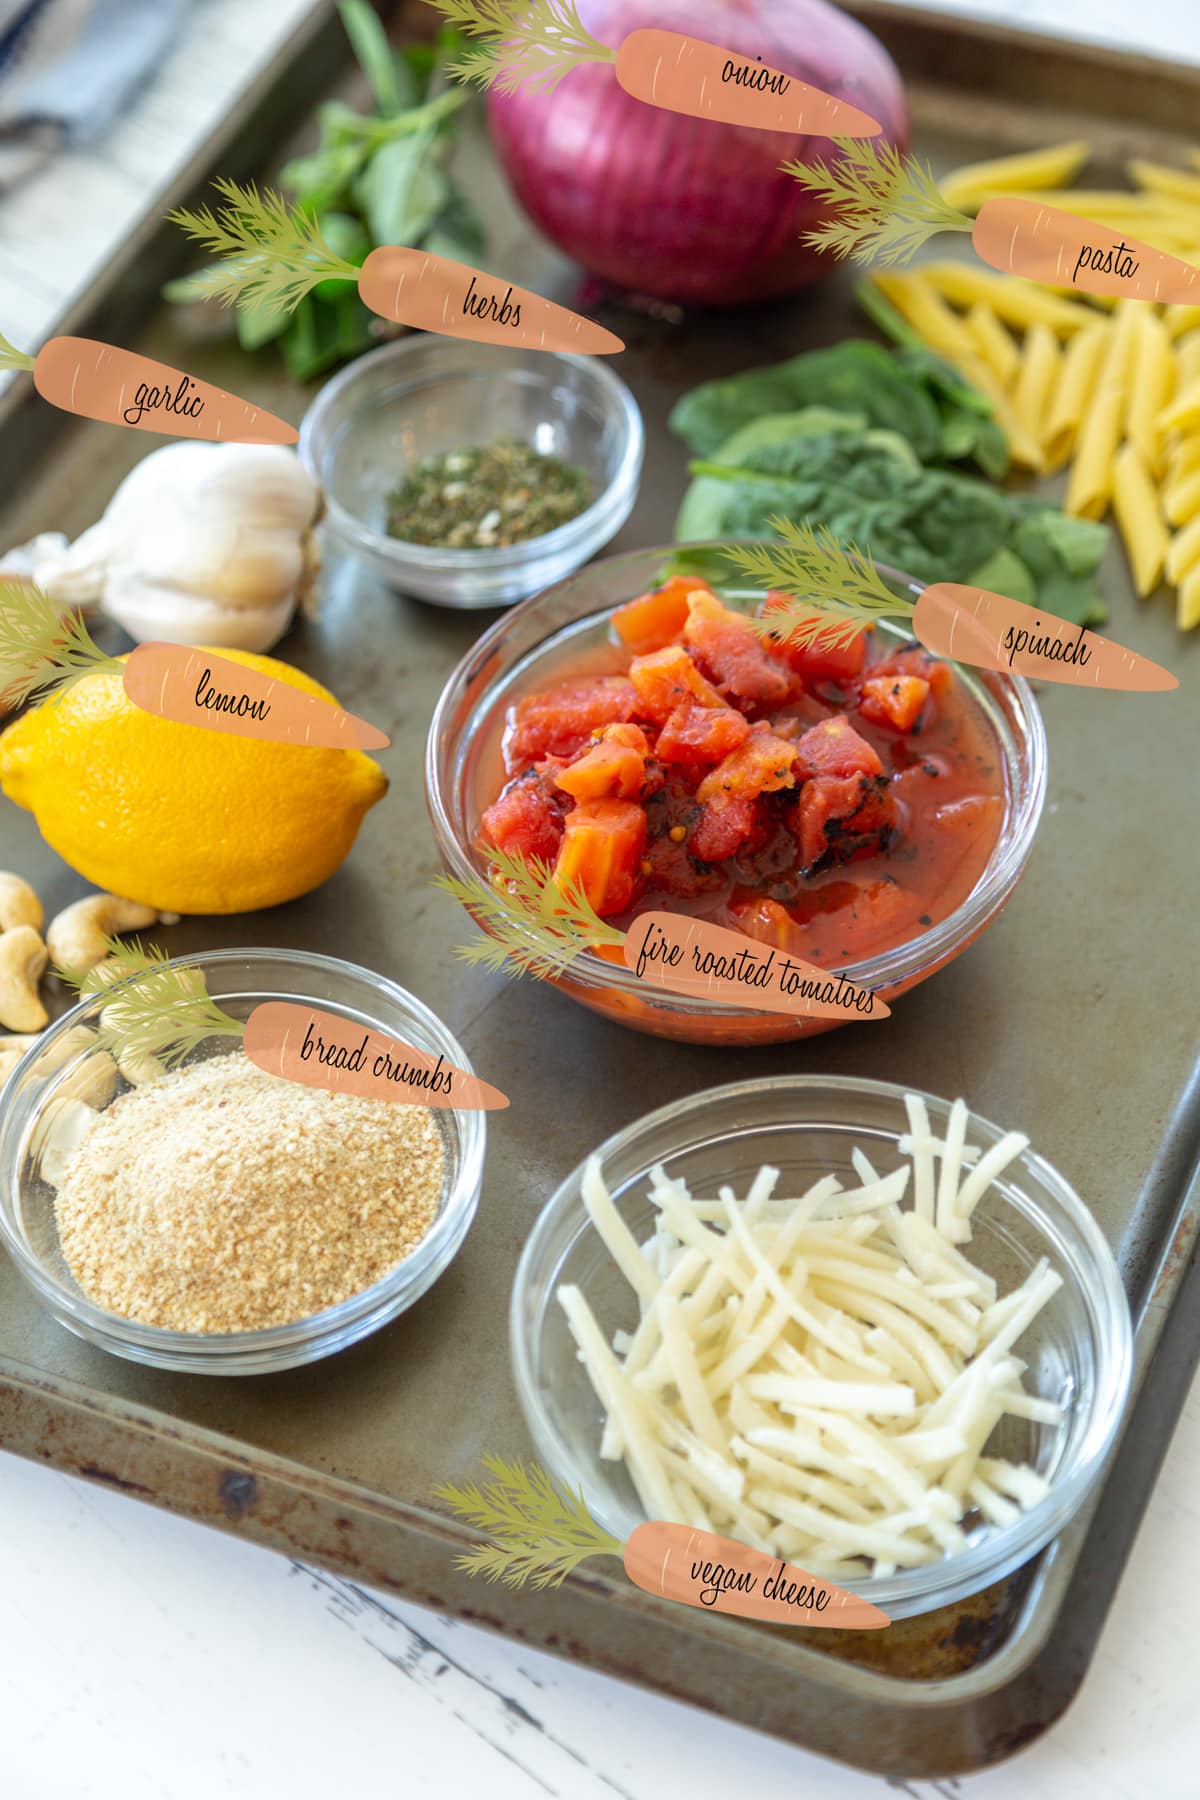 Ingredients for baked penne pasta casserole.